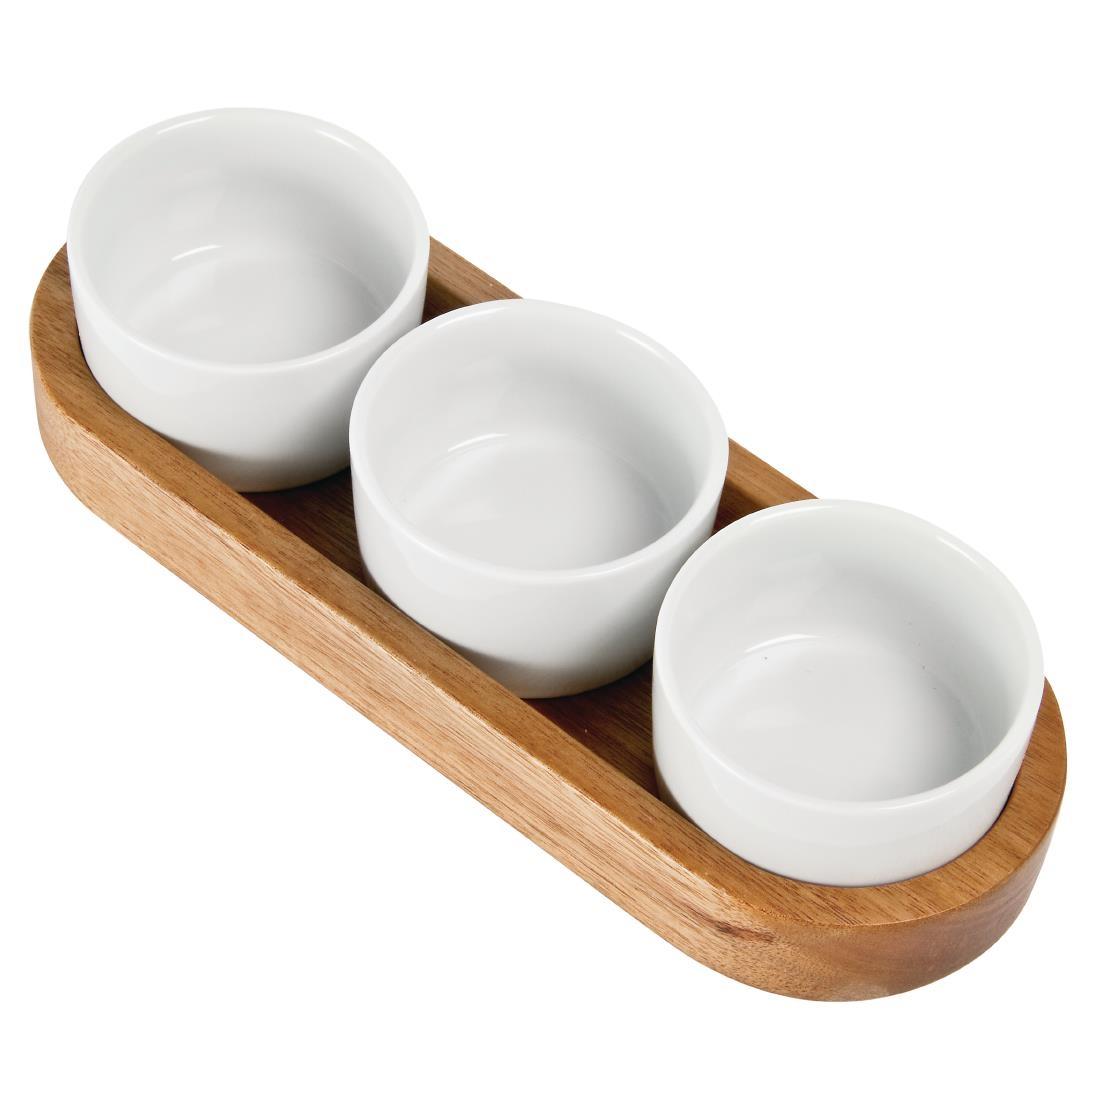 Wooden Condiments Tray - GH308  - 2